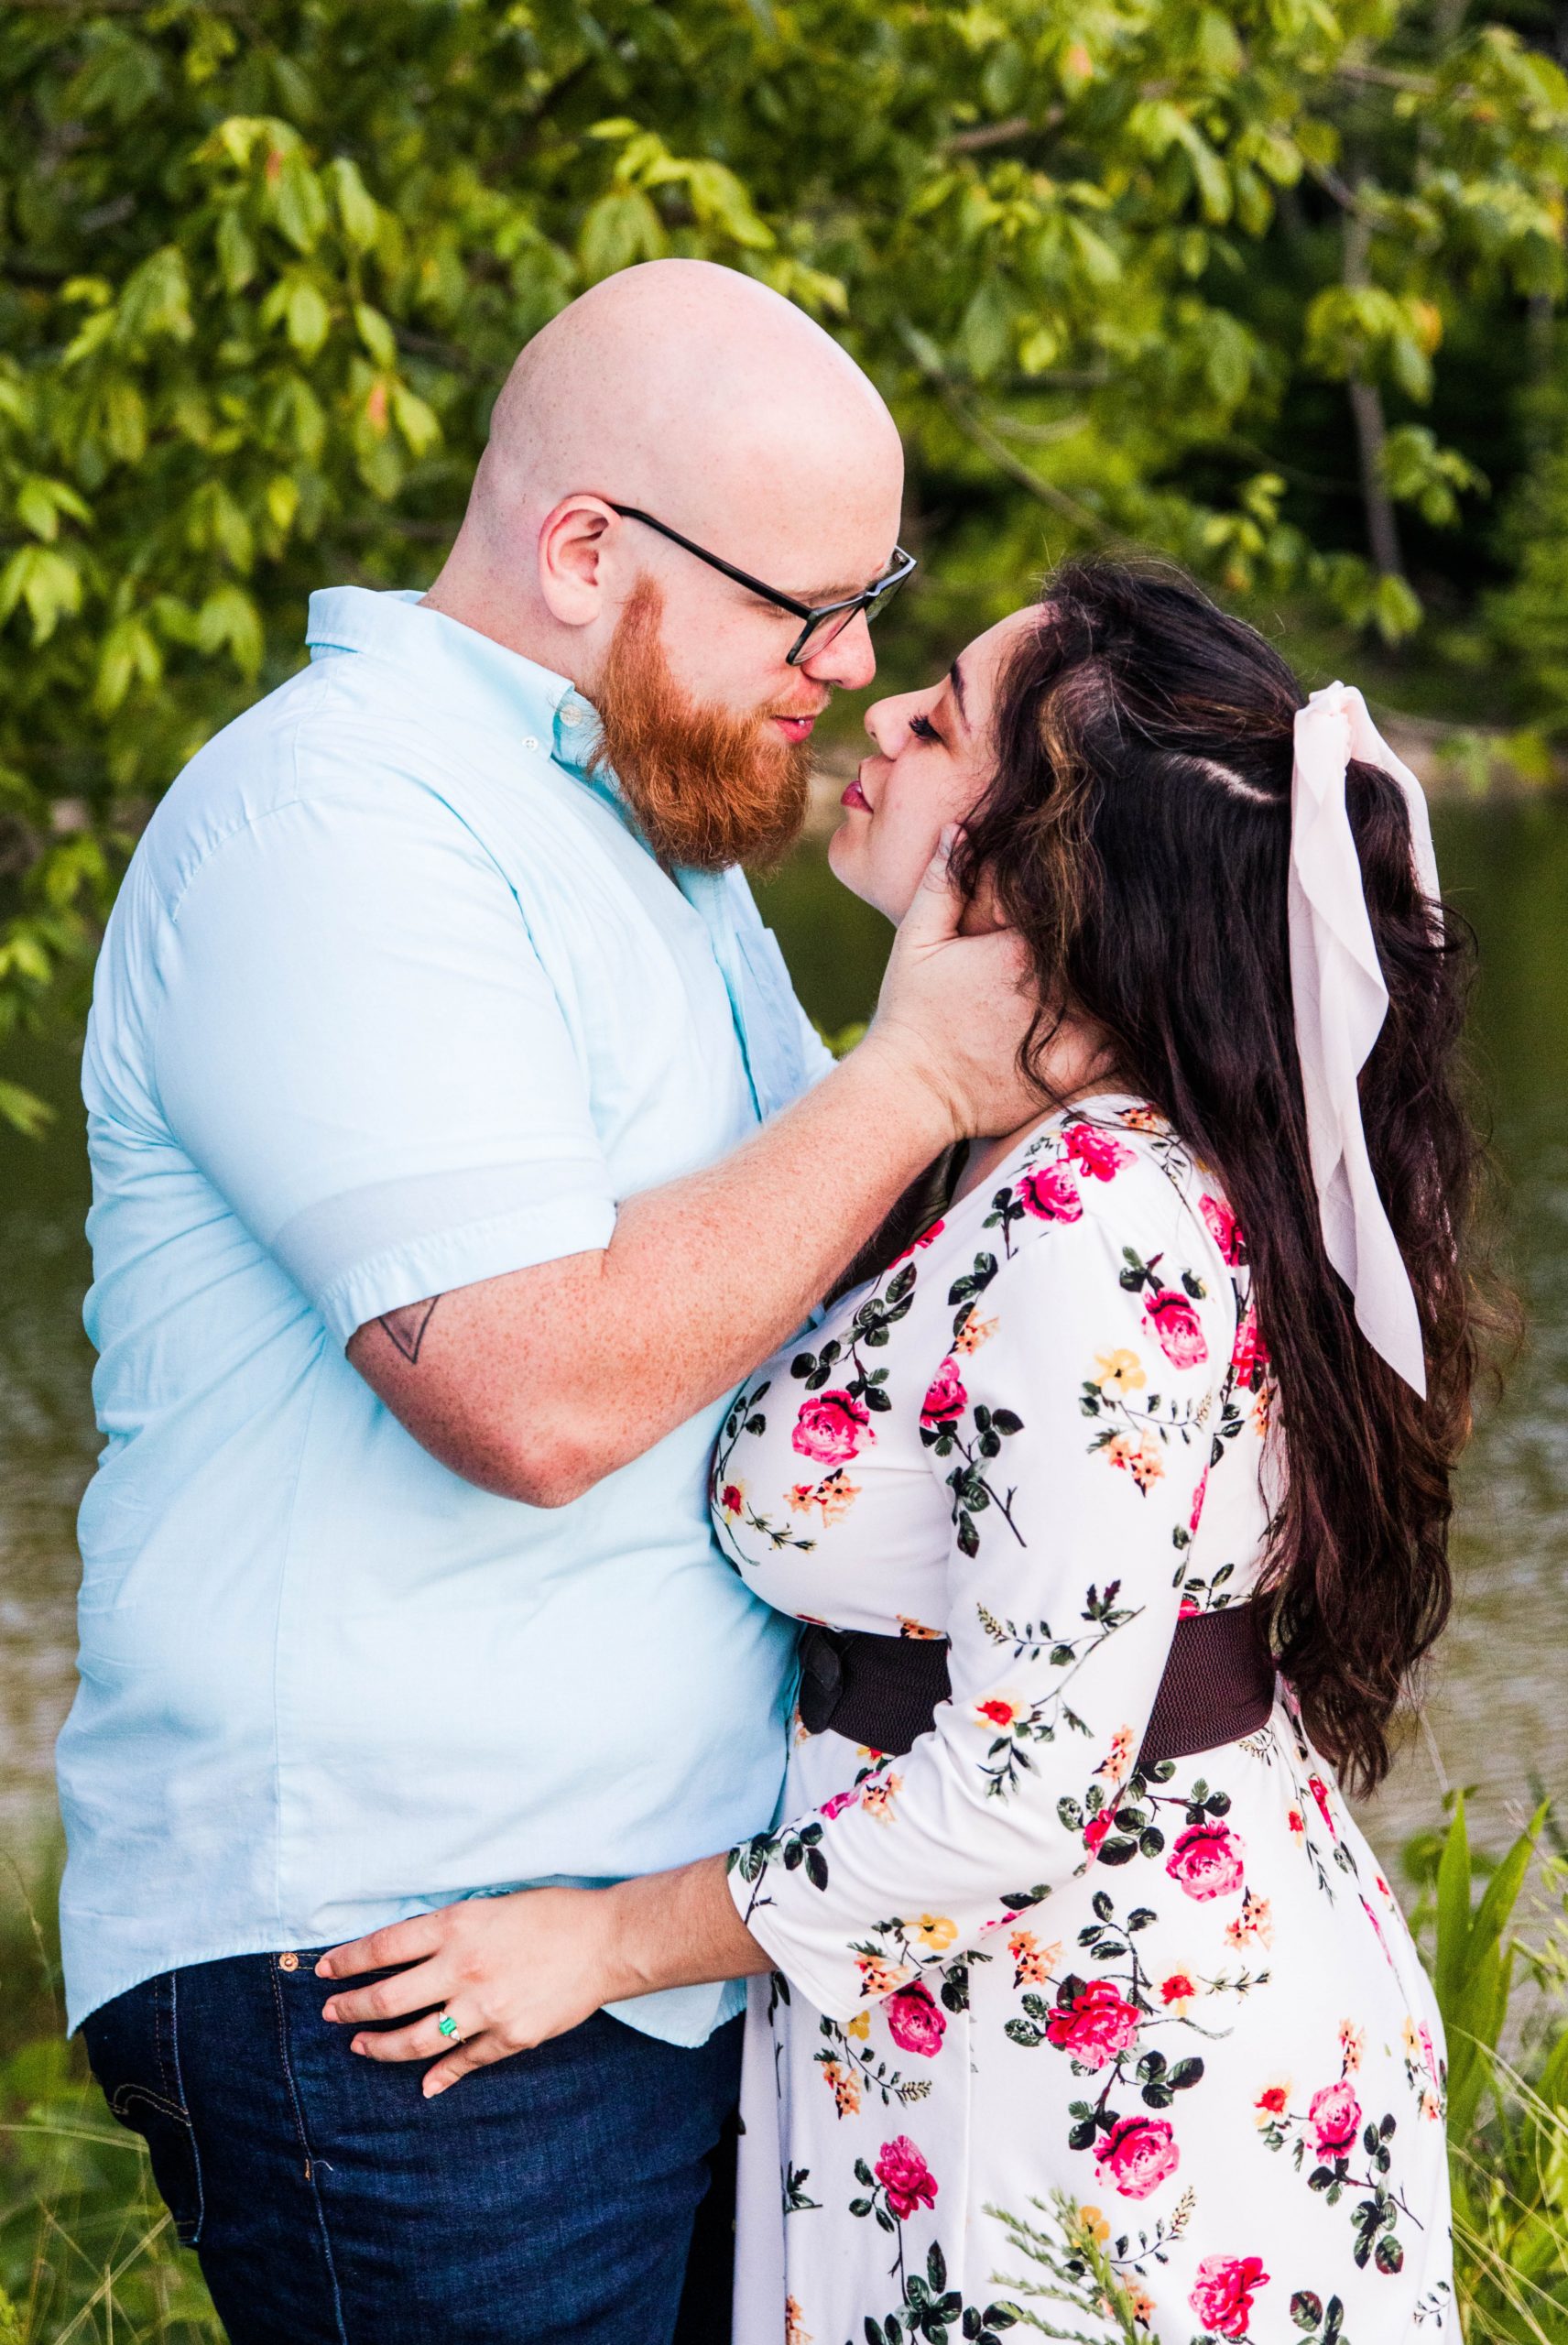 Summer time Cincinnati engagement session with a groom's hand holding onto the side of the bride's face as they lean closer for a kiss